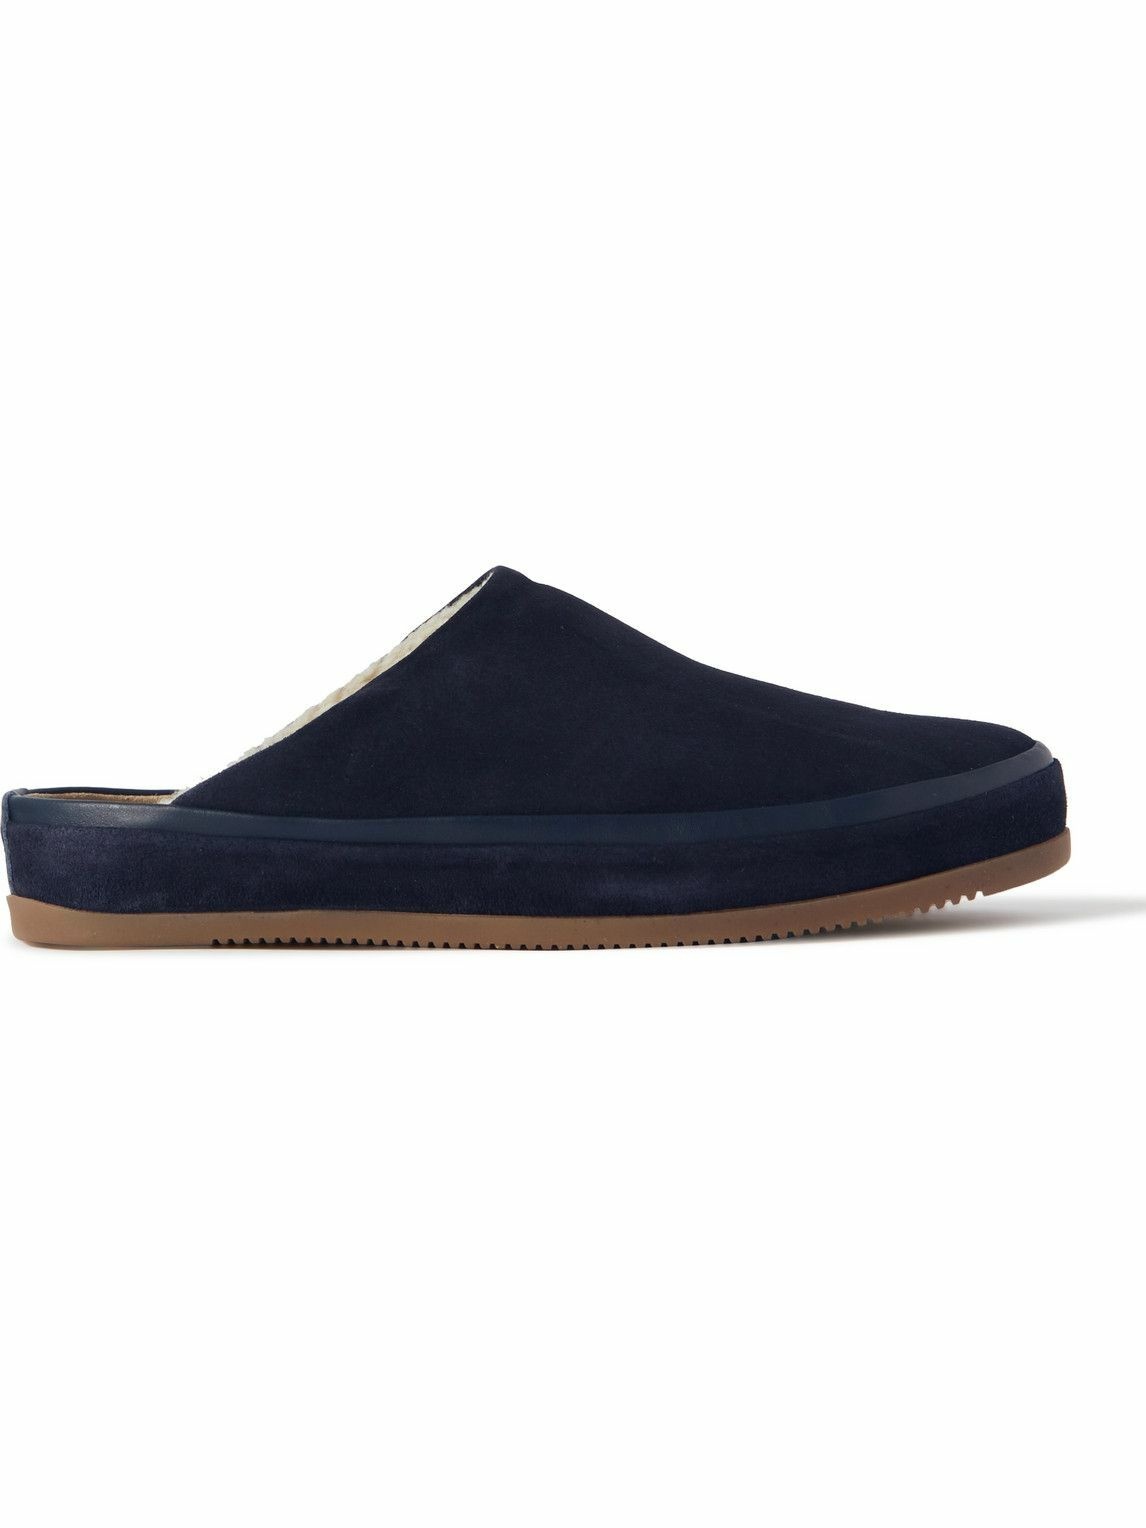 Mulo - Shearling-Lined Suede Slippers - Blue Mulo